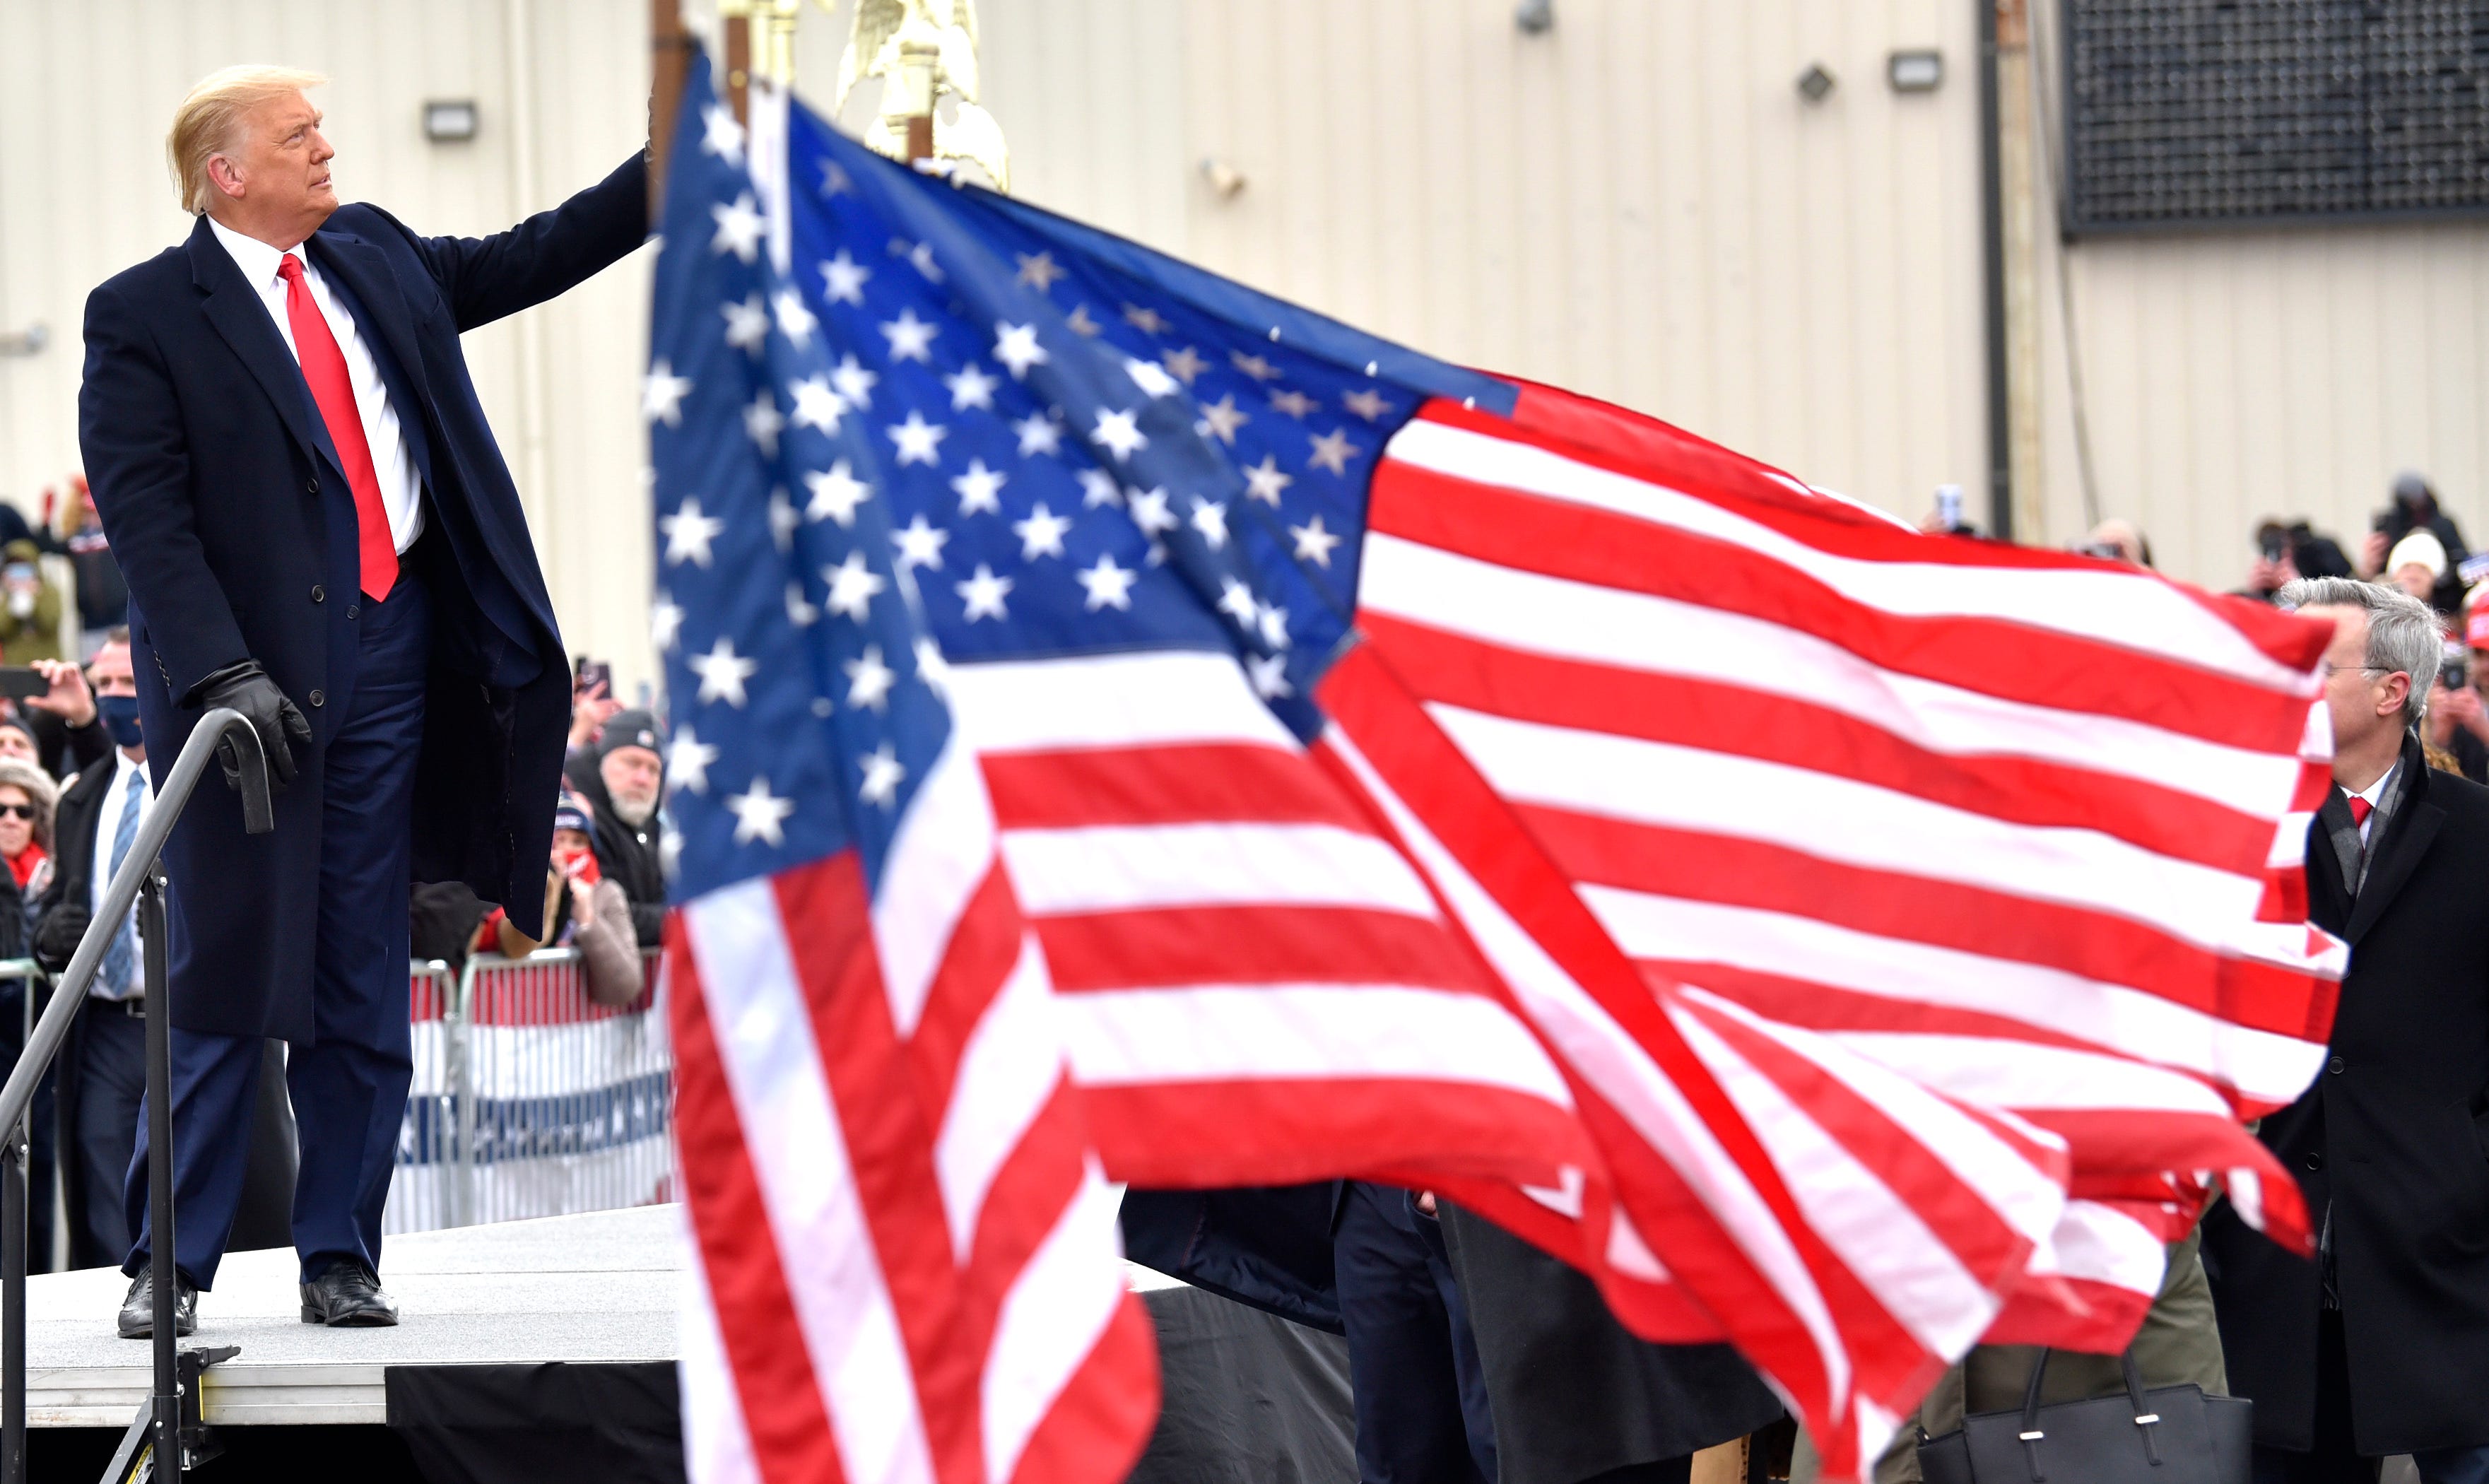 President Trump waves to supporters after speaking at the Oakland International Airport in Waterford Twp., Friday, October 30, 2020, for his Make America Great Again Victory Rally.